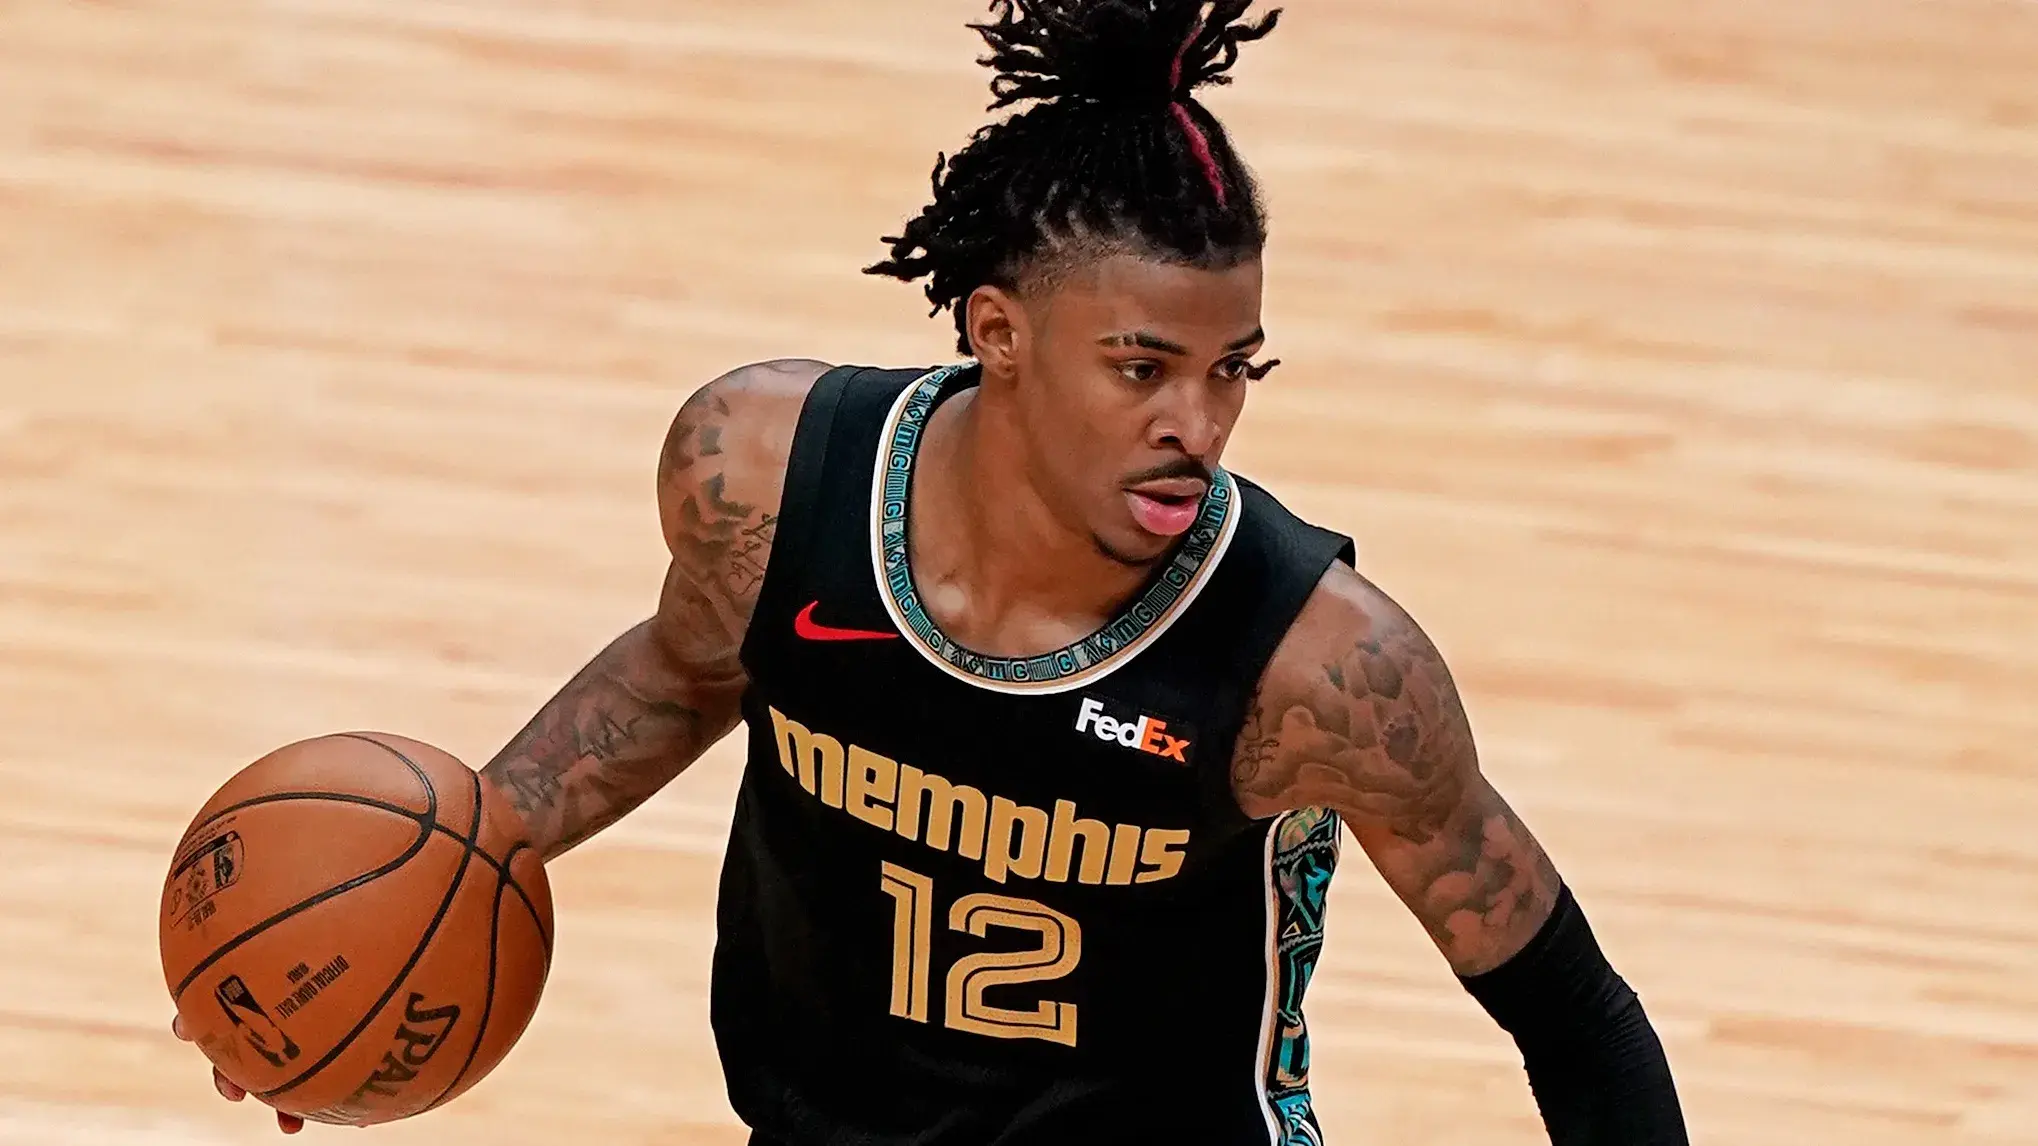 Apr 6, 2021; Miami, Florida, USA; Memphis Grizzlies guard Ja Morant (12) dribbles the ball against the Miami Heat during the second half at American Airlines Arena. / © Jasen Vinlove-USA TODAY Sports